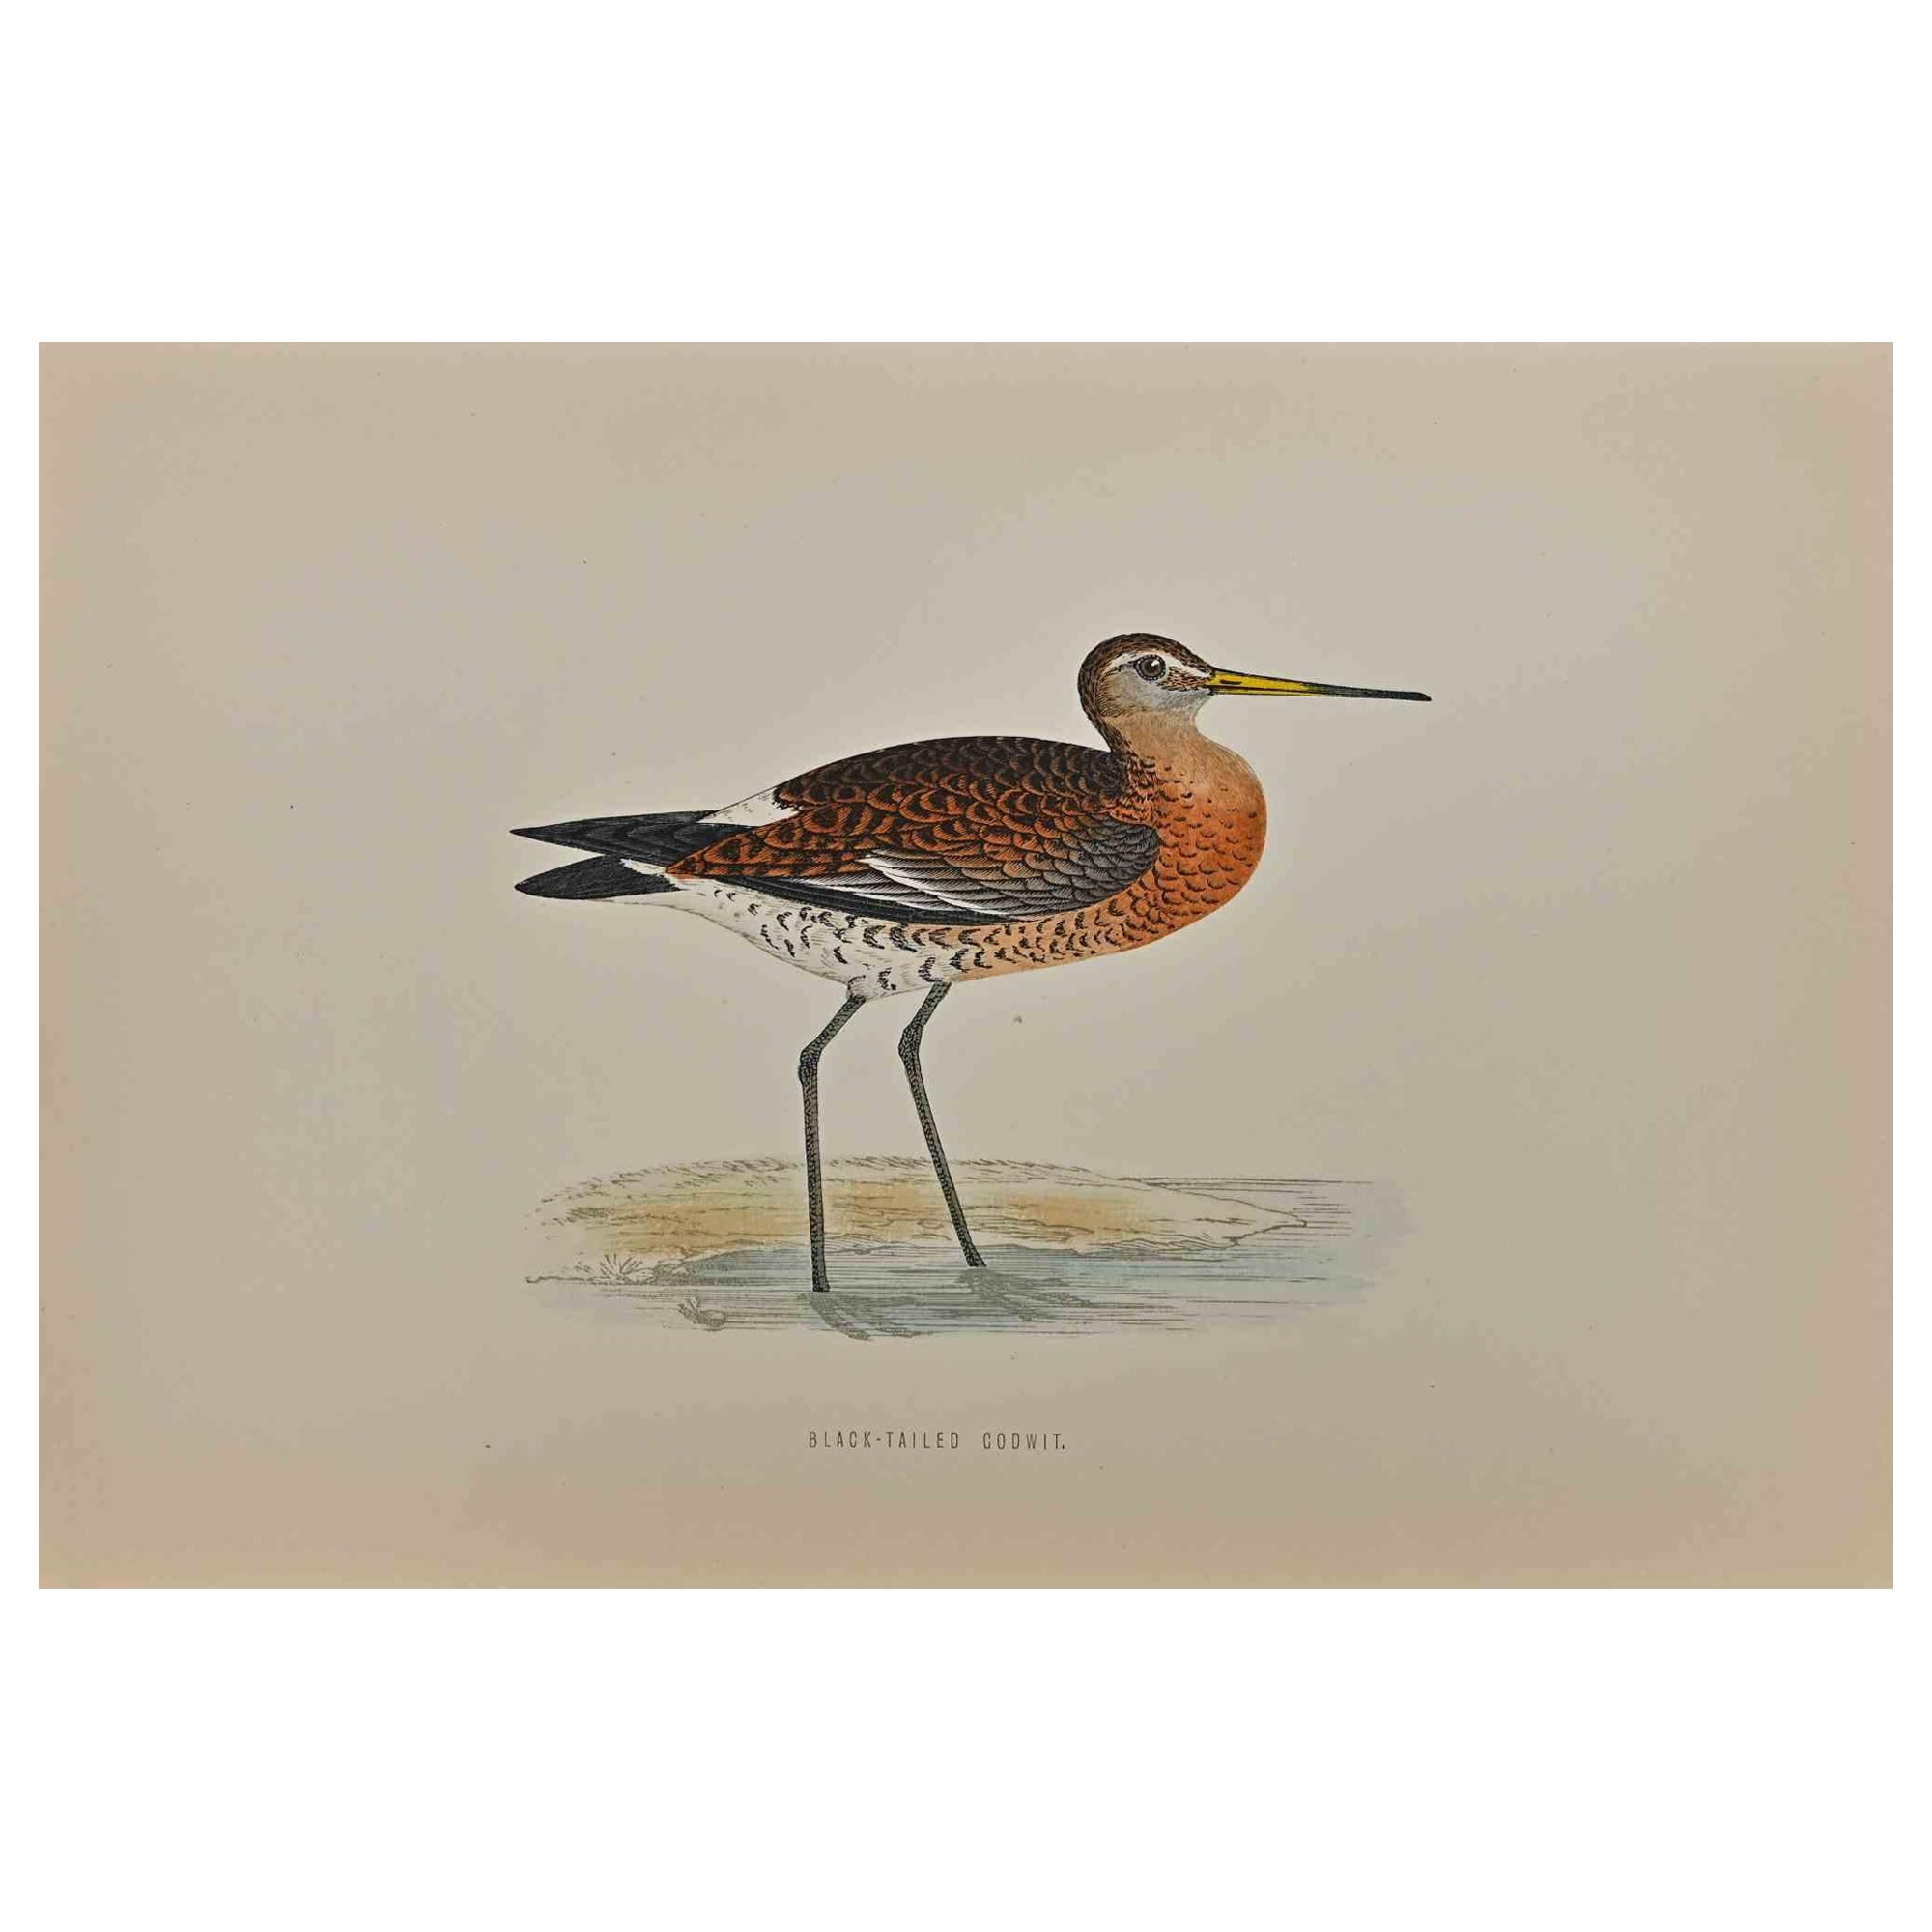 Black-Tailed Godwit - Mixed Colored Woodcut Print - 1870